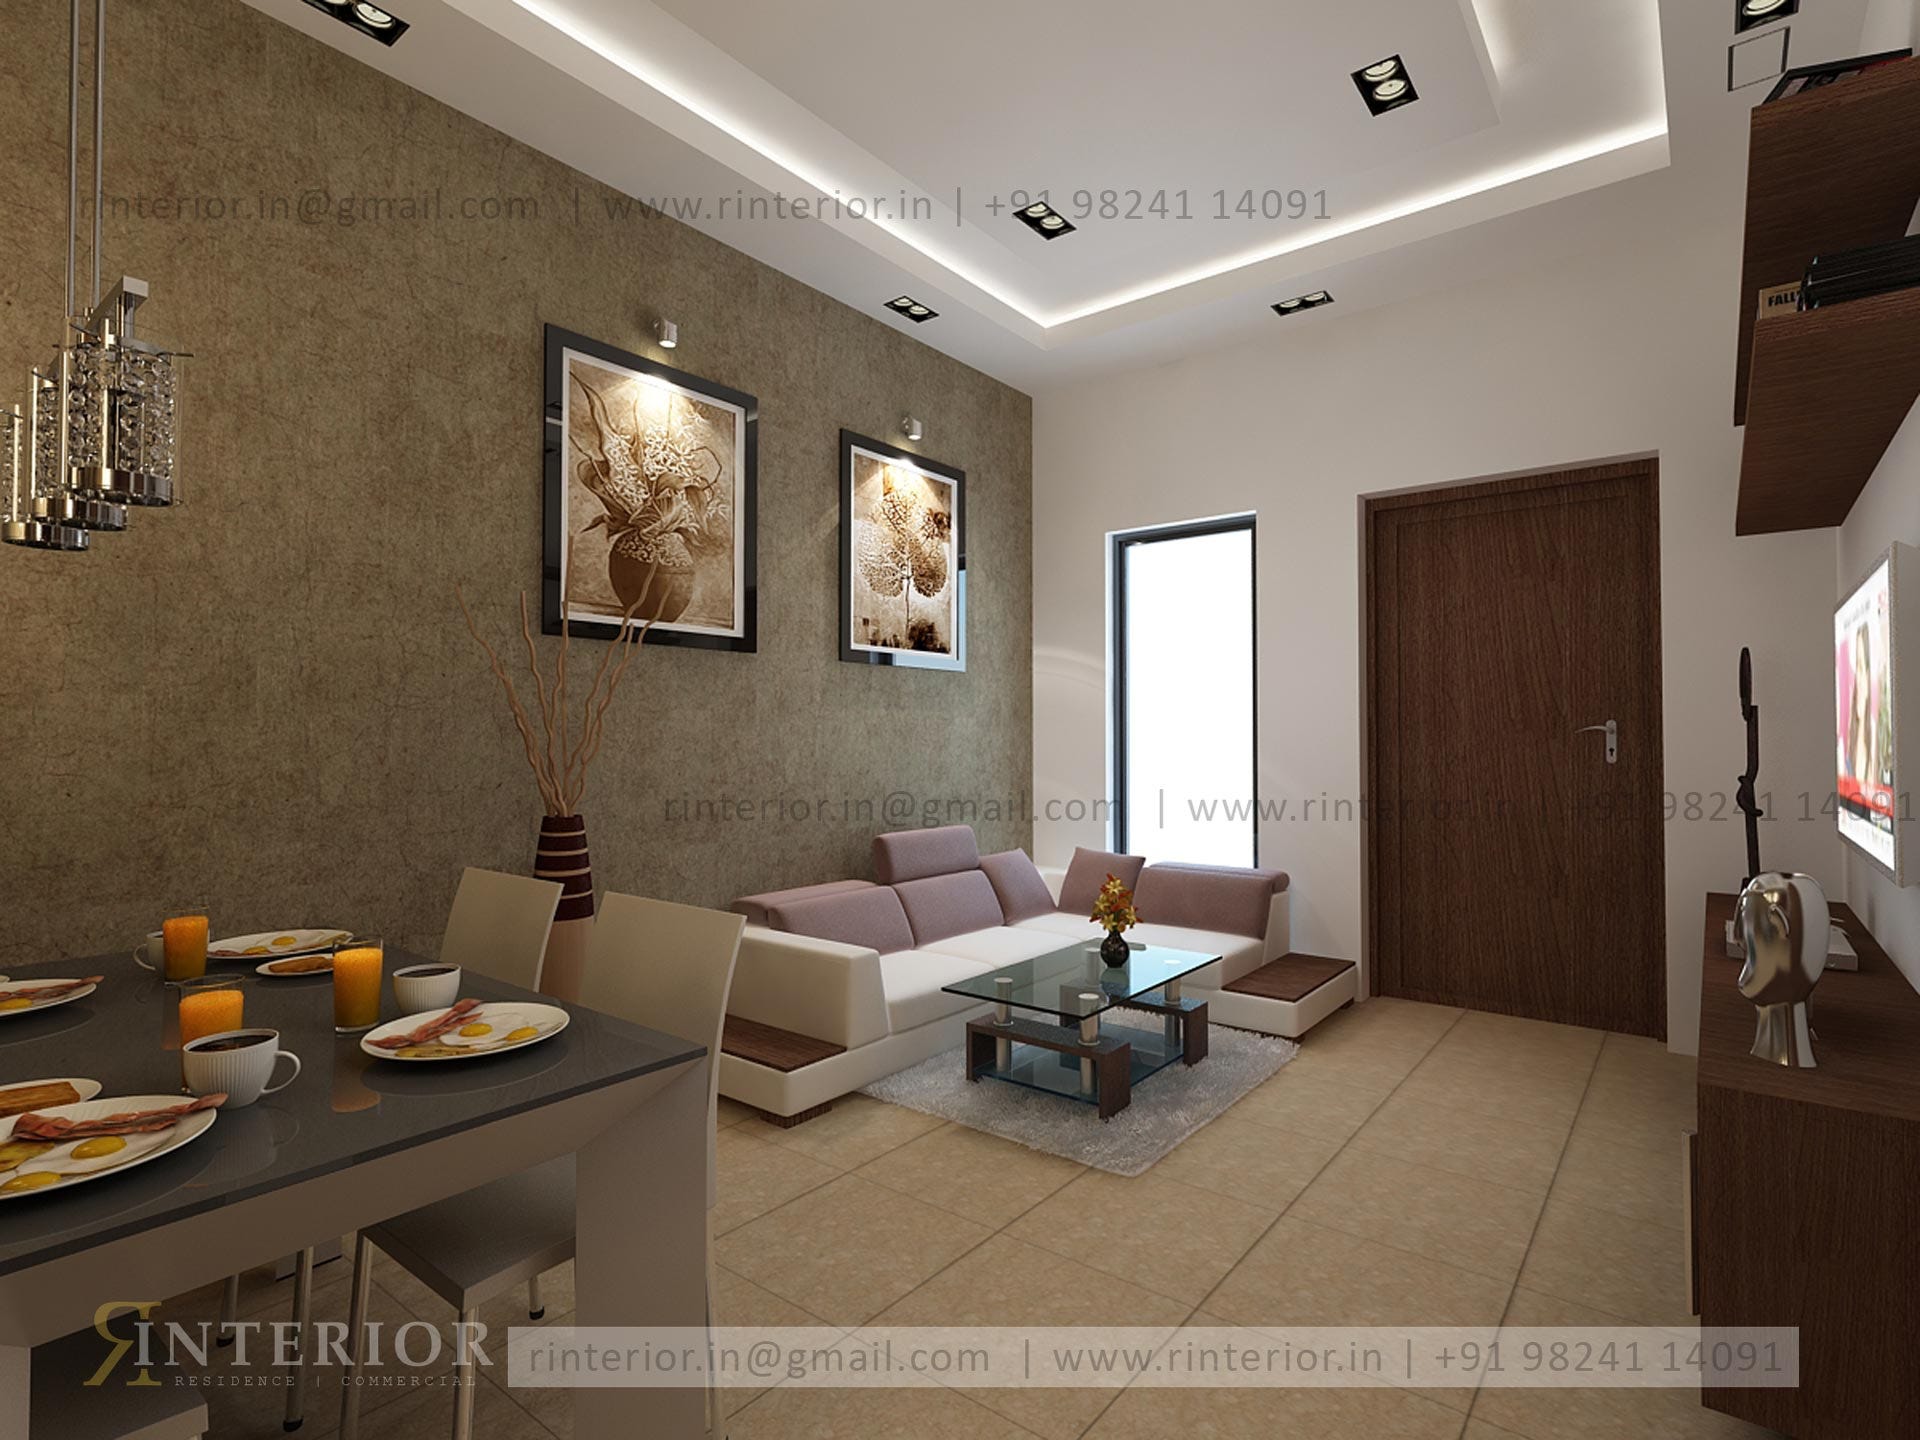 All People Find The Home Design In Ahmedabad R Interior